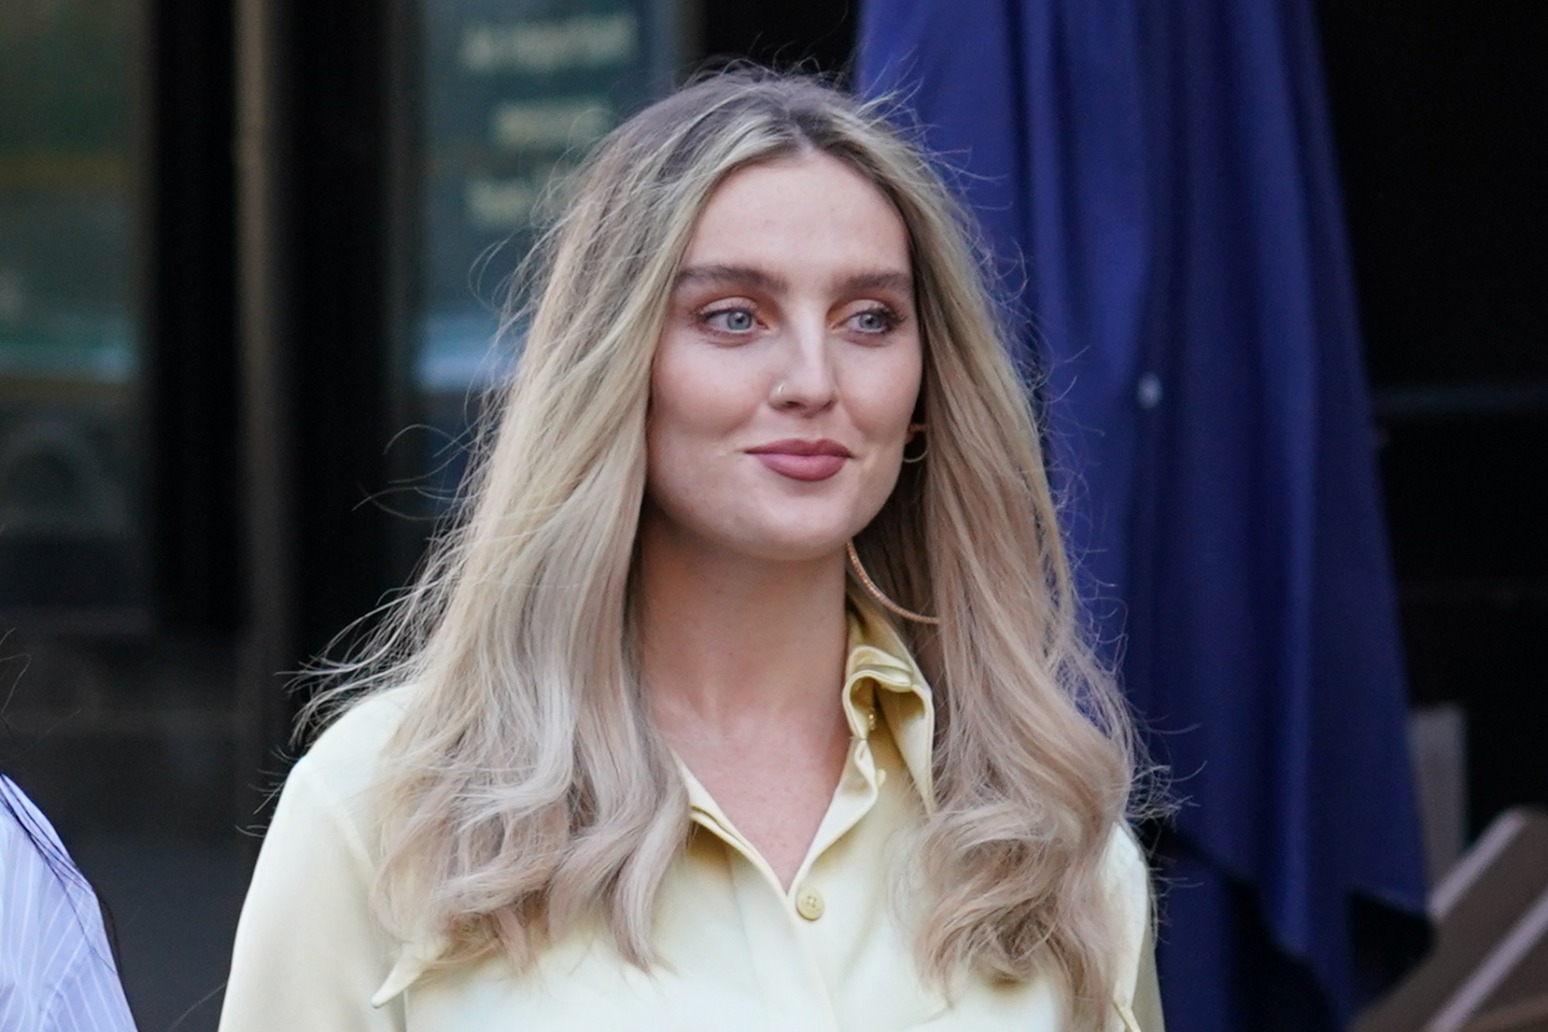 Little Mix star Perrie Edwards expecting first child 